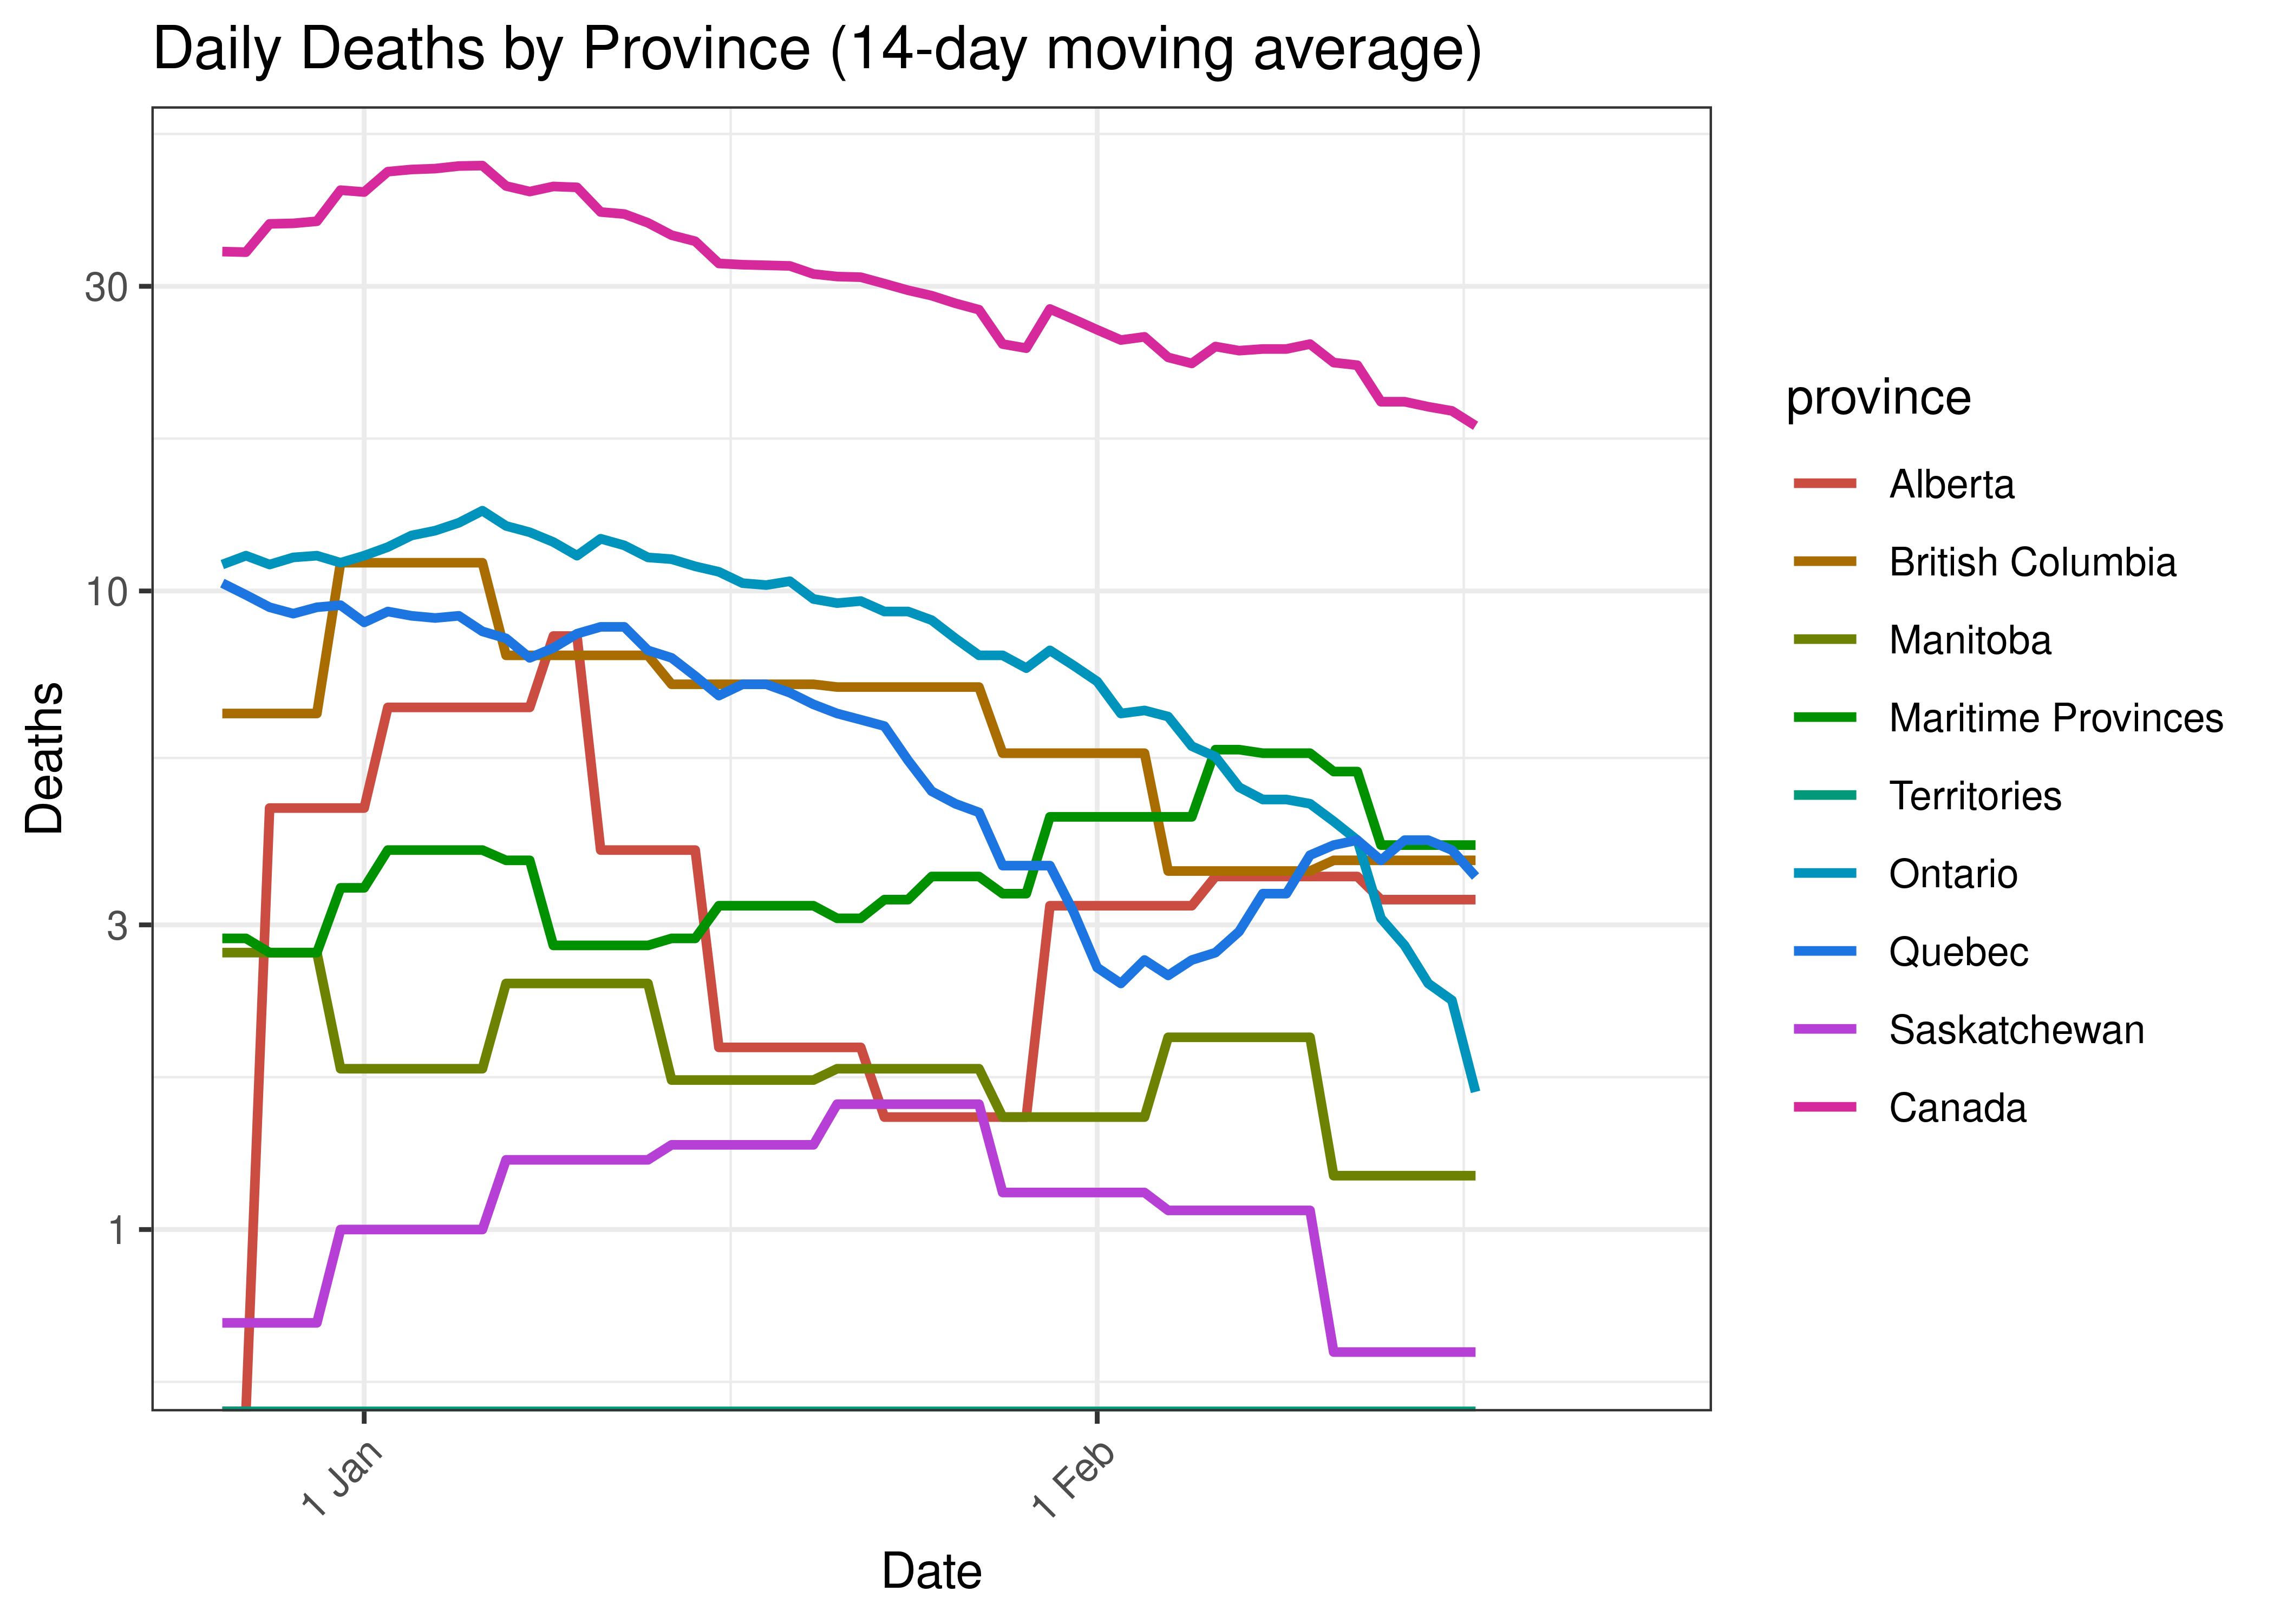 Daily Deaths by Province for Last 60 Days (14-day moving average)